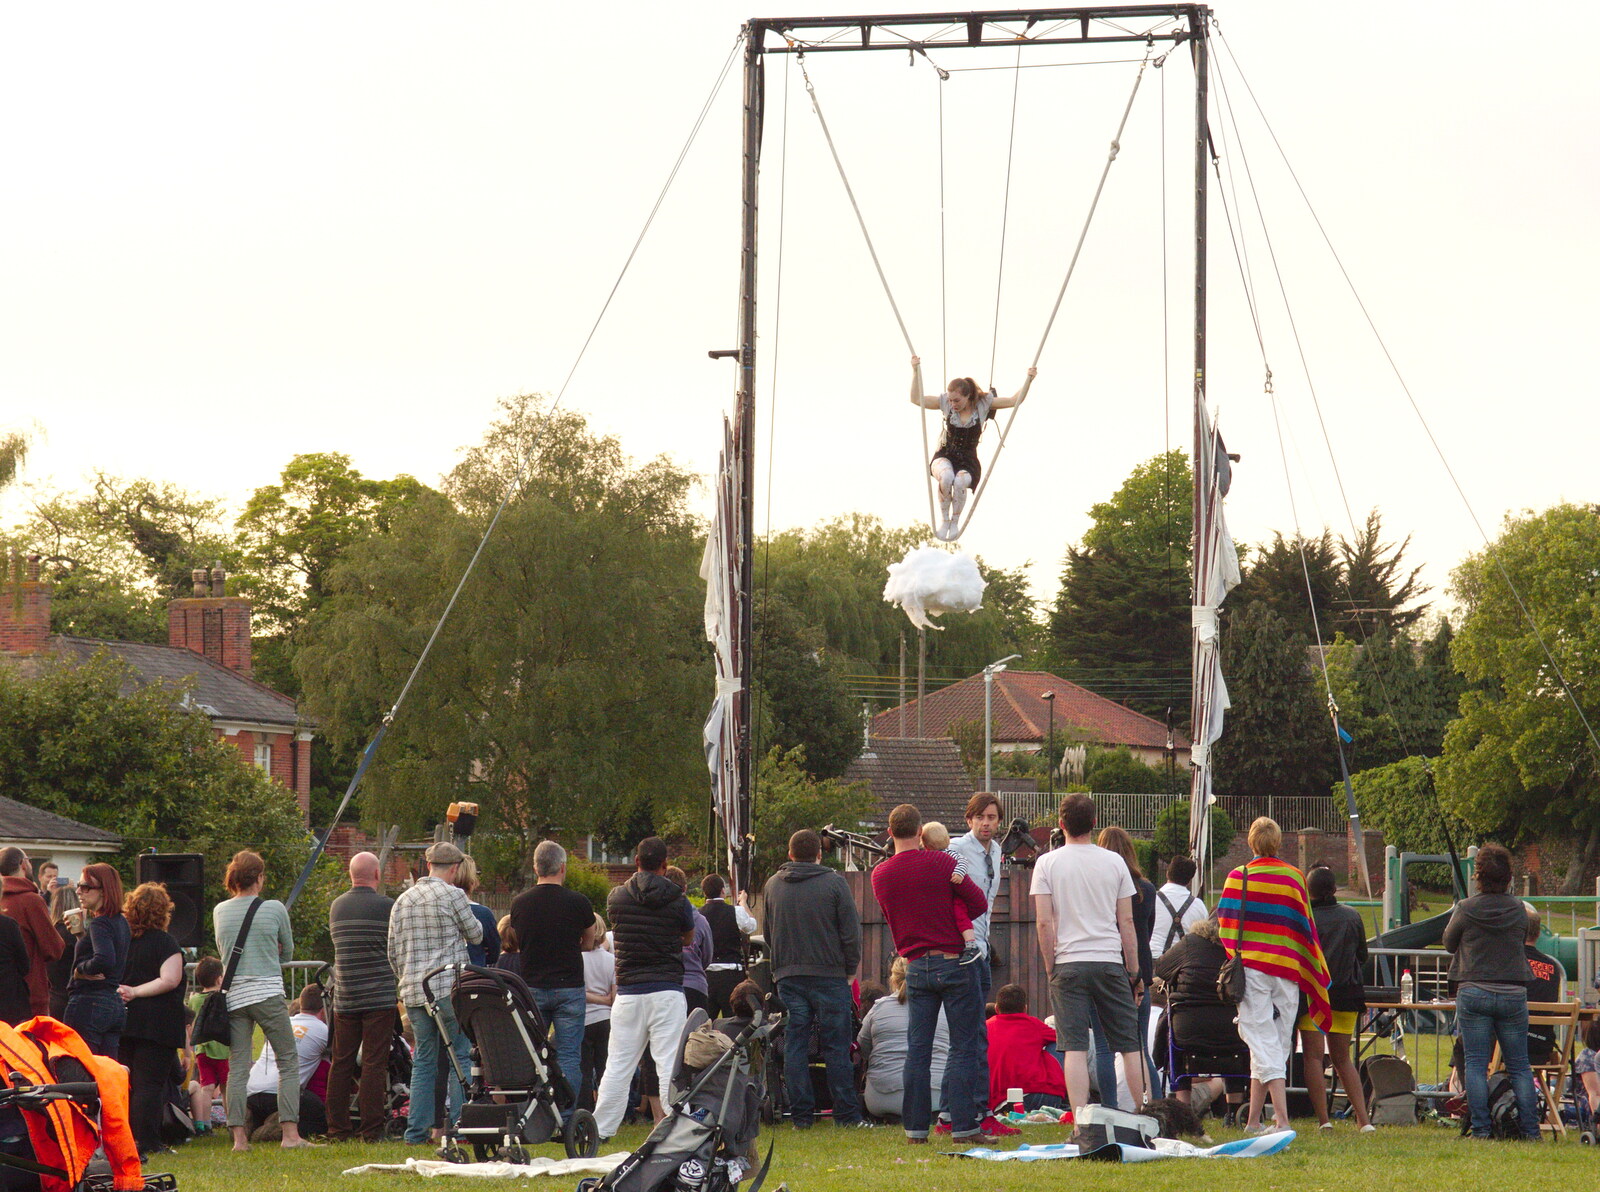 Some high-wire acrobatics occurs from A Family Fun Day on the Park, Diss, Norfolk - 16th May 2014